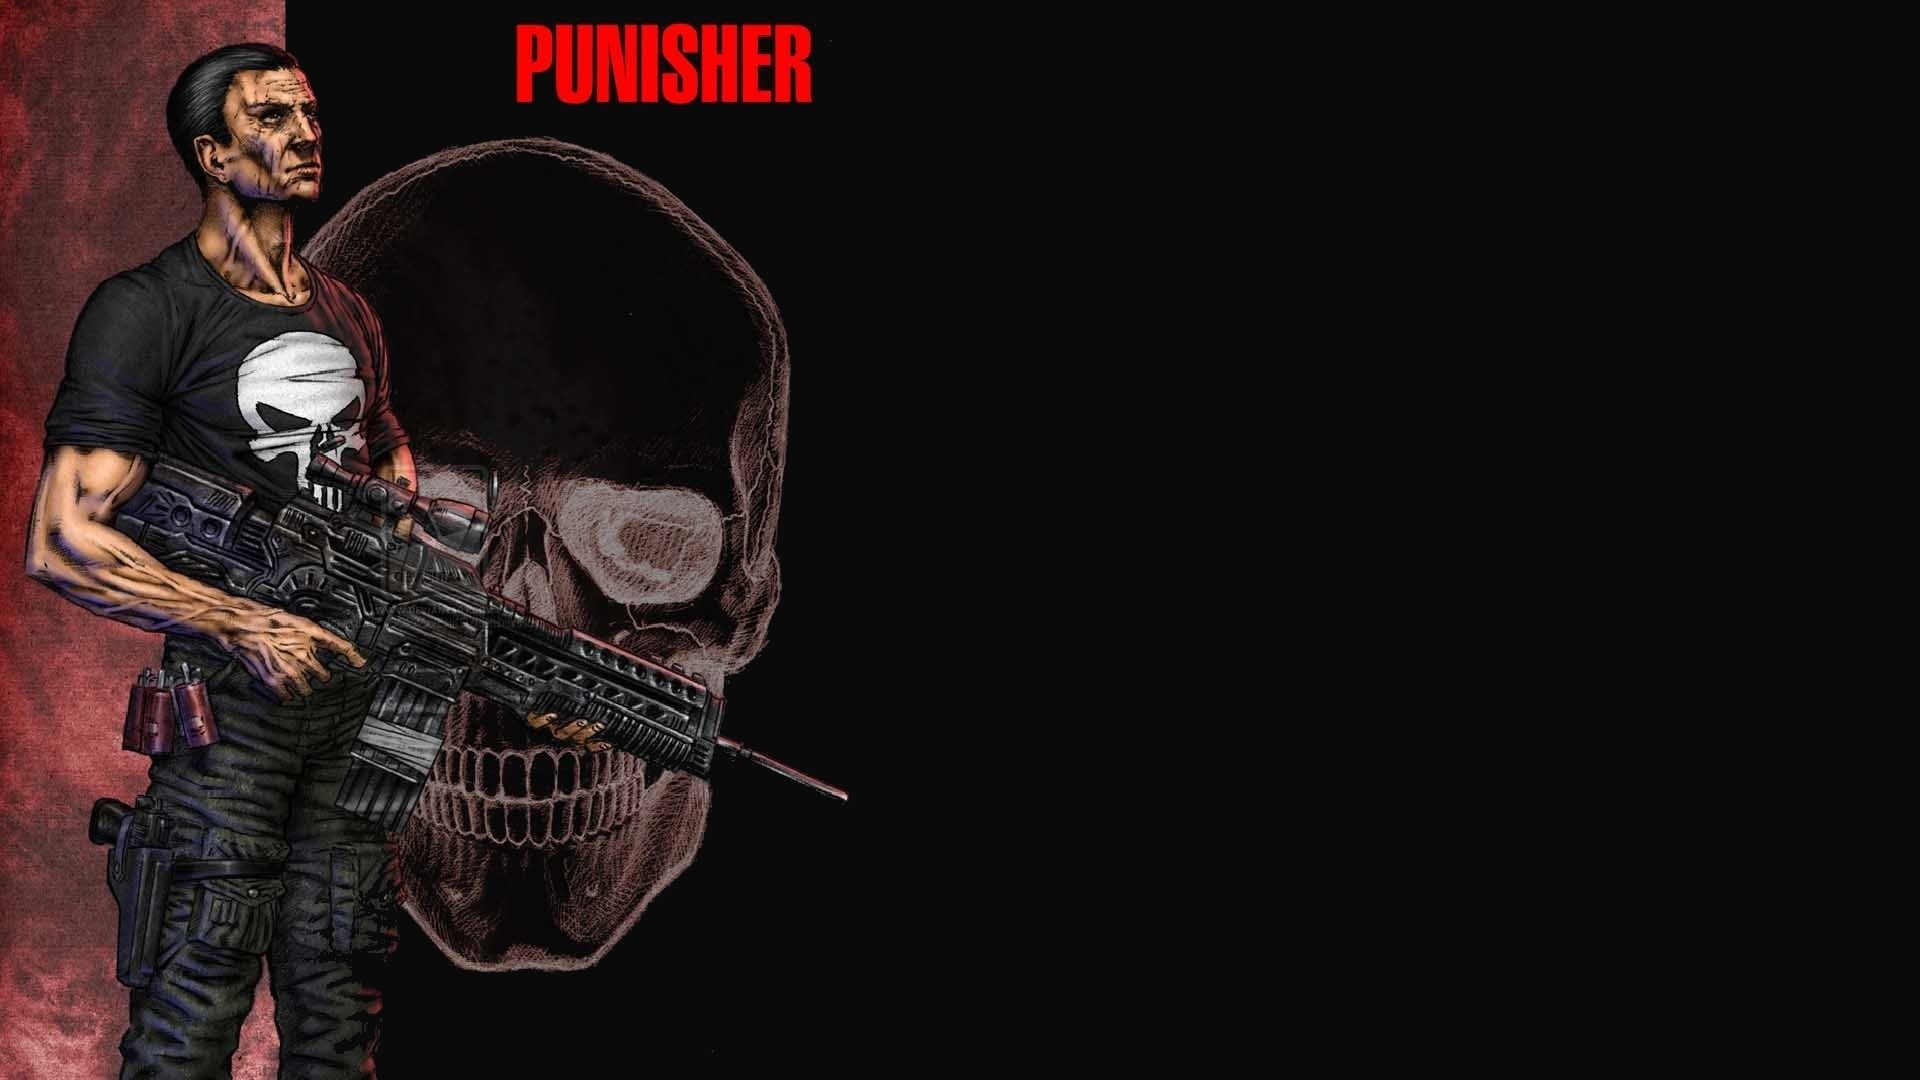 Punisher HD Wallpapers Backgrounds Wallpaper